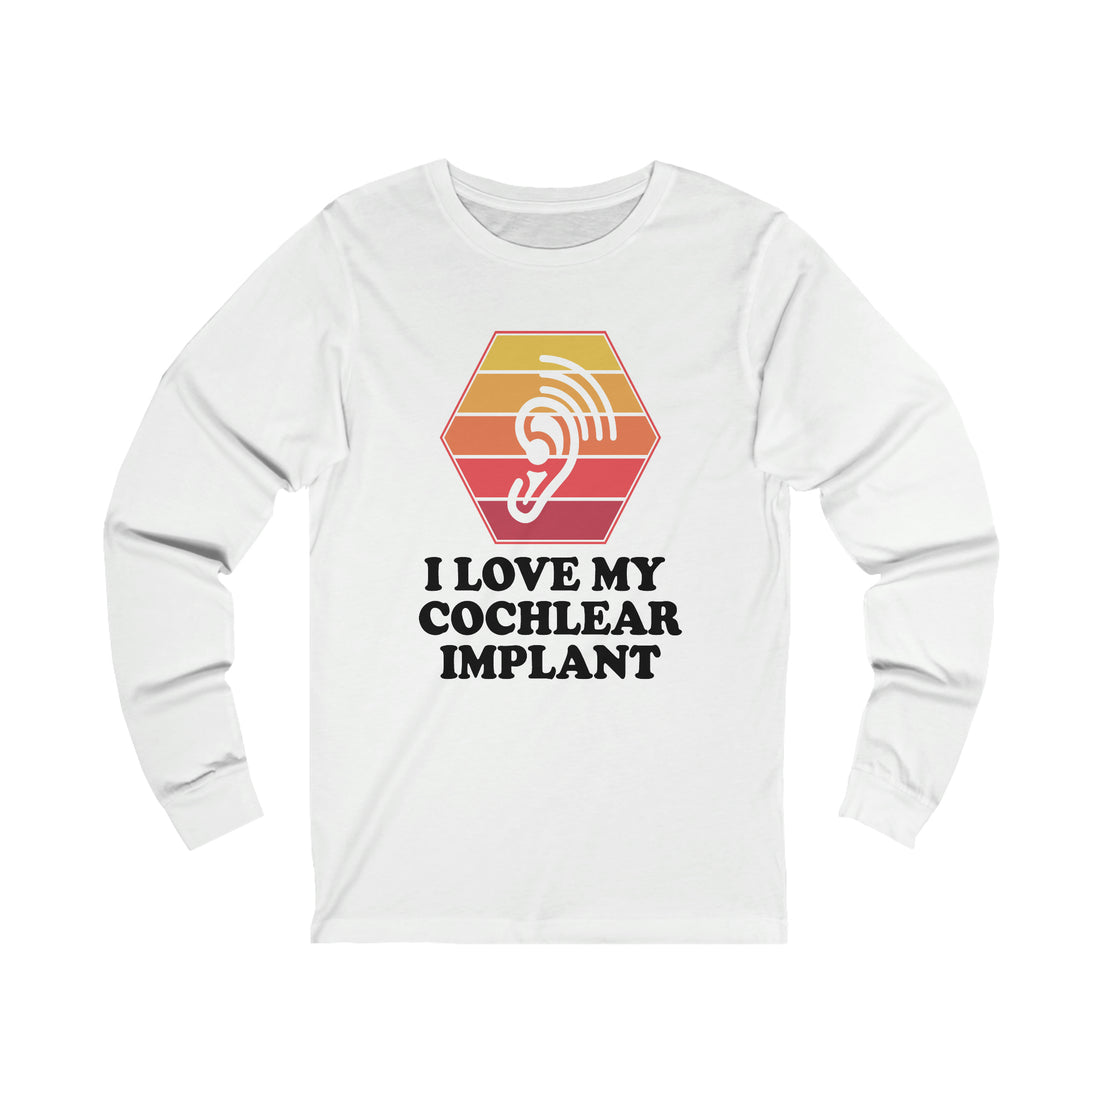 I Love My Cochlear Implant  - Unisex Jersey Long Sleeve Tee